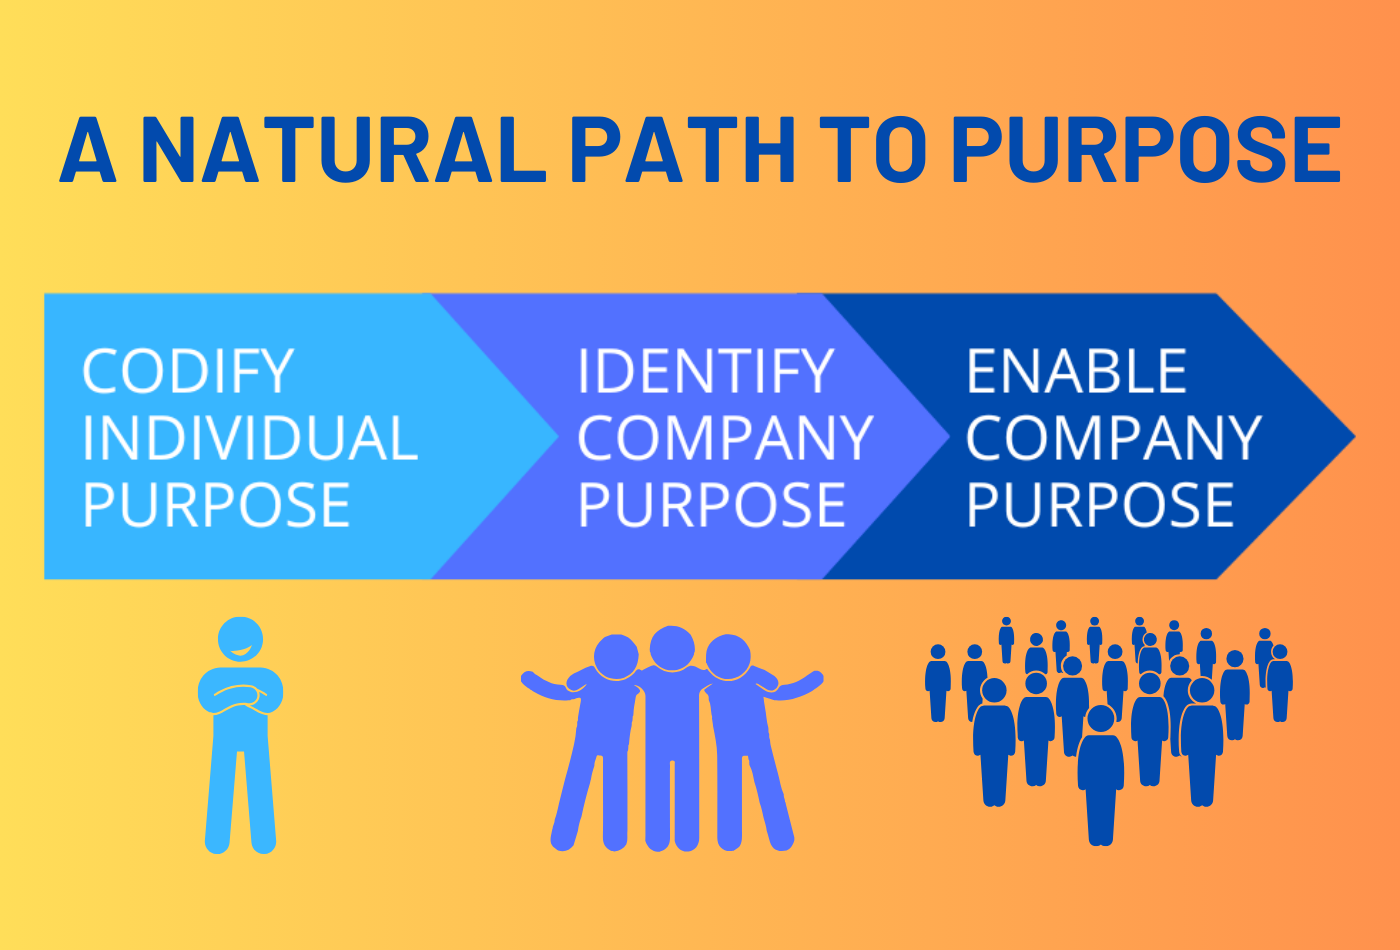 The natural path to purpose at Purpose-Driven Academy.